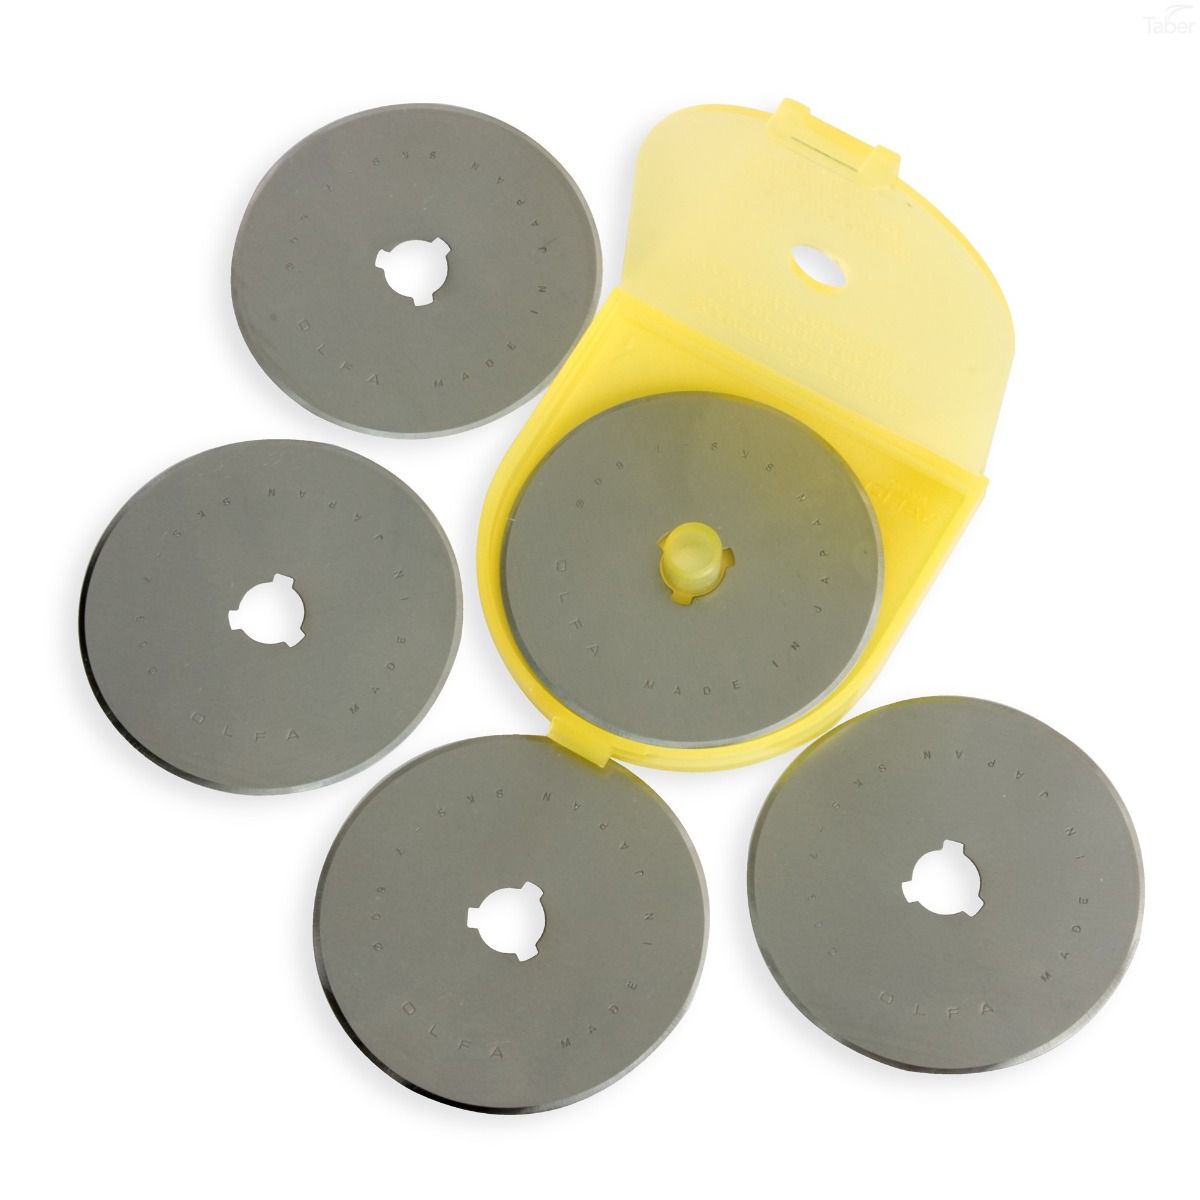 Olfa 60mm Deluxe Rotary Cutter Replacement Blades (5/Pk) #RB60-5 - Clearance Sale